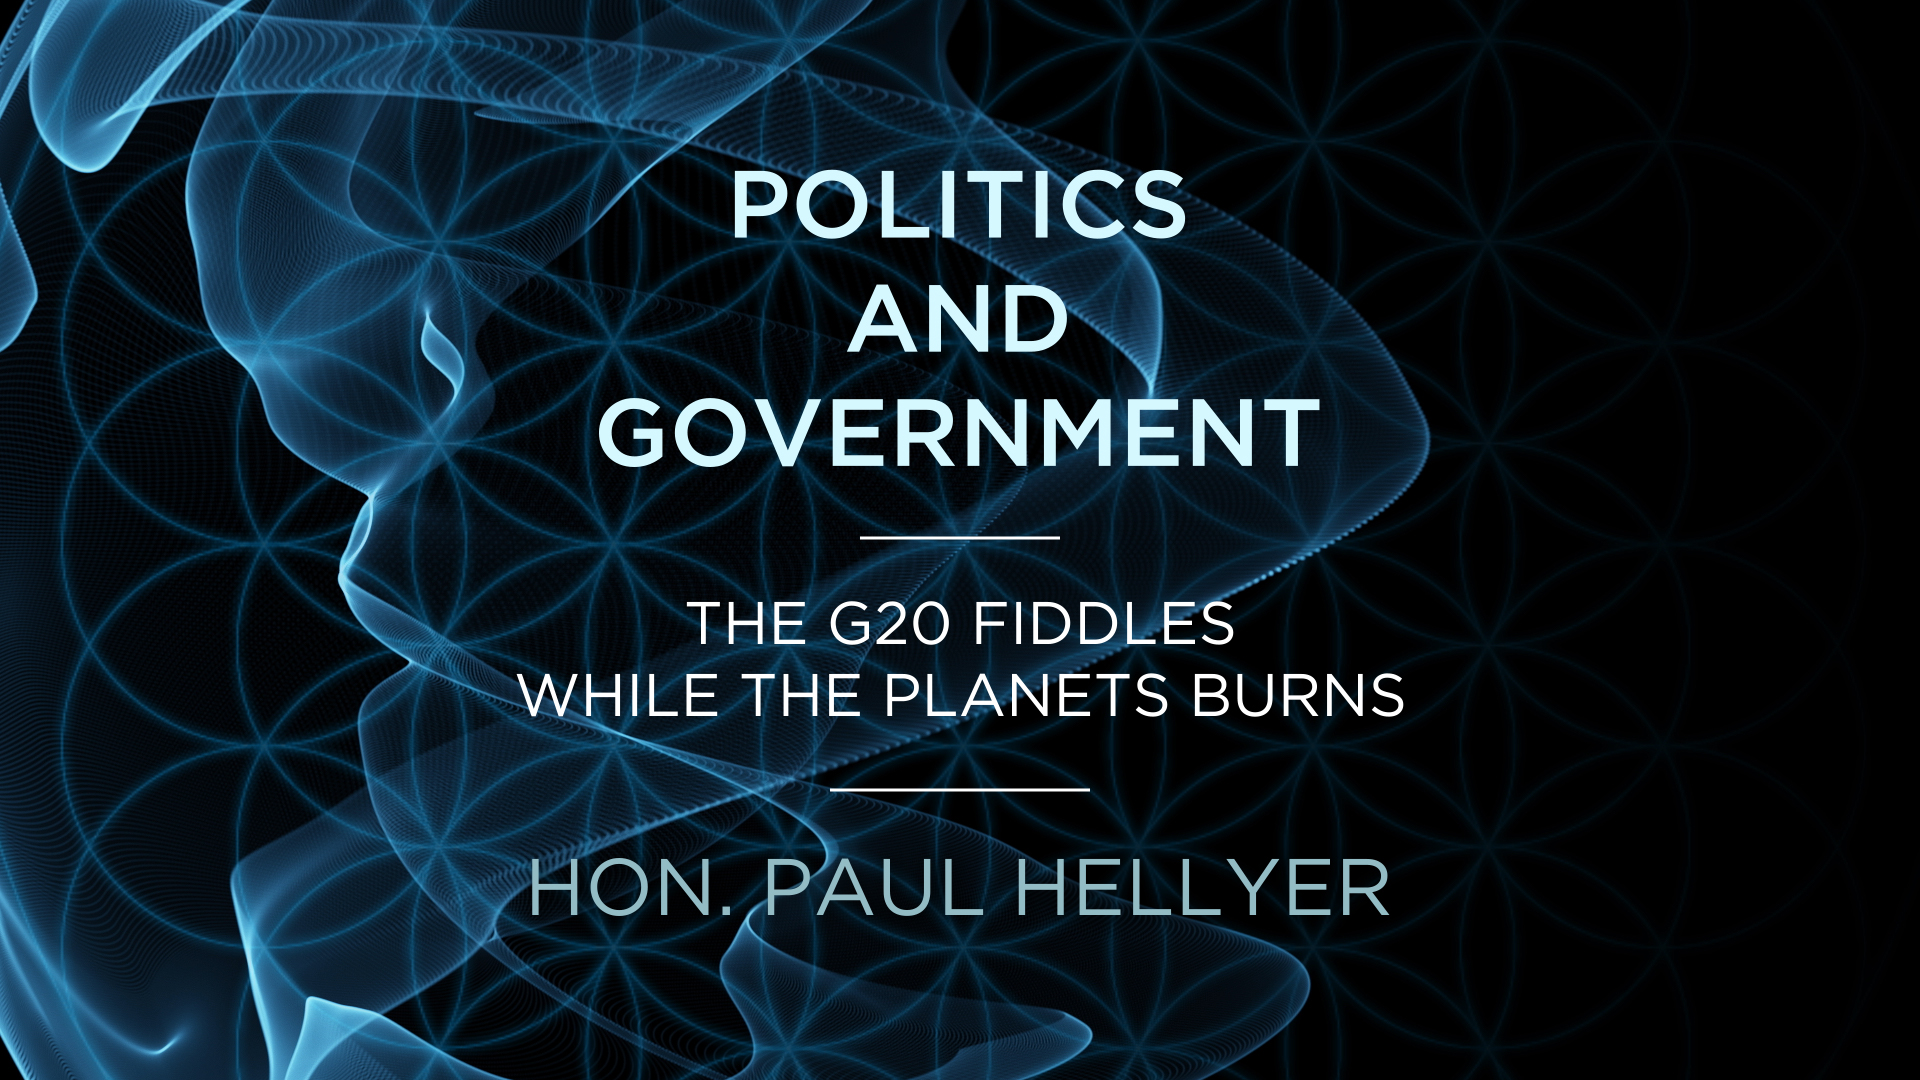 Hon. Paul Hellyer – The G20 fiddles while the planet burns